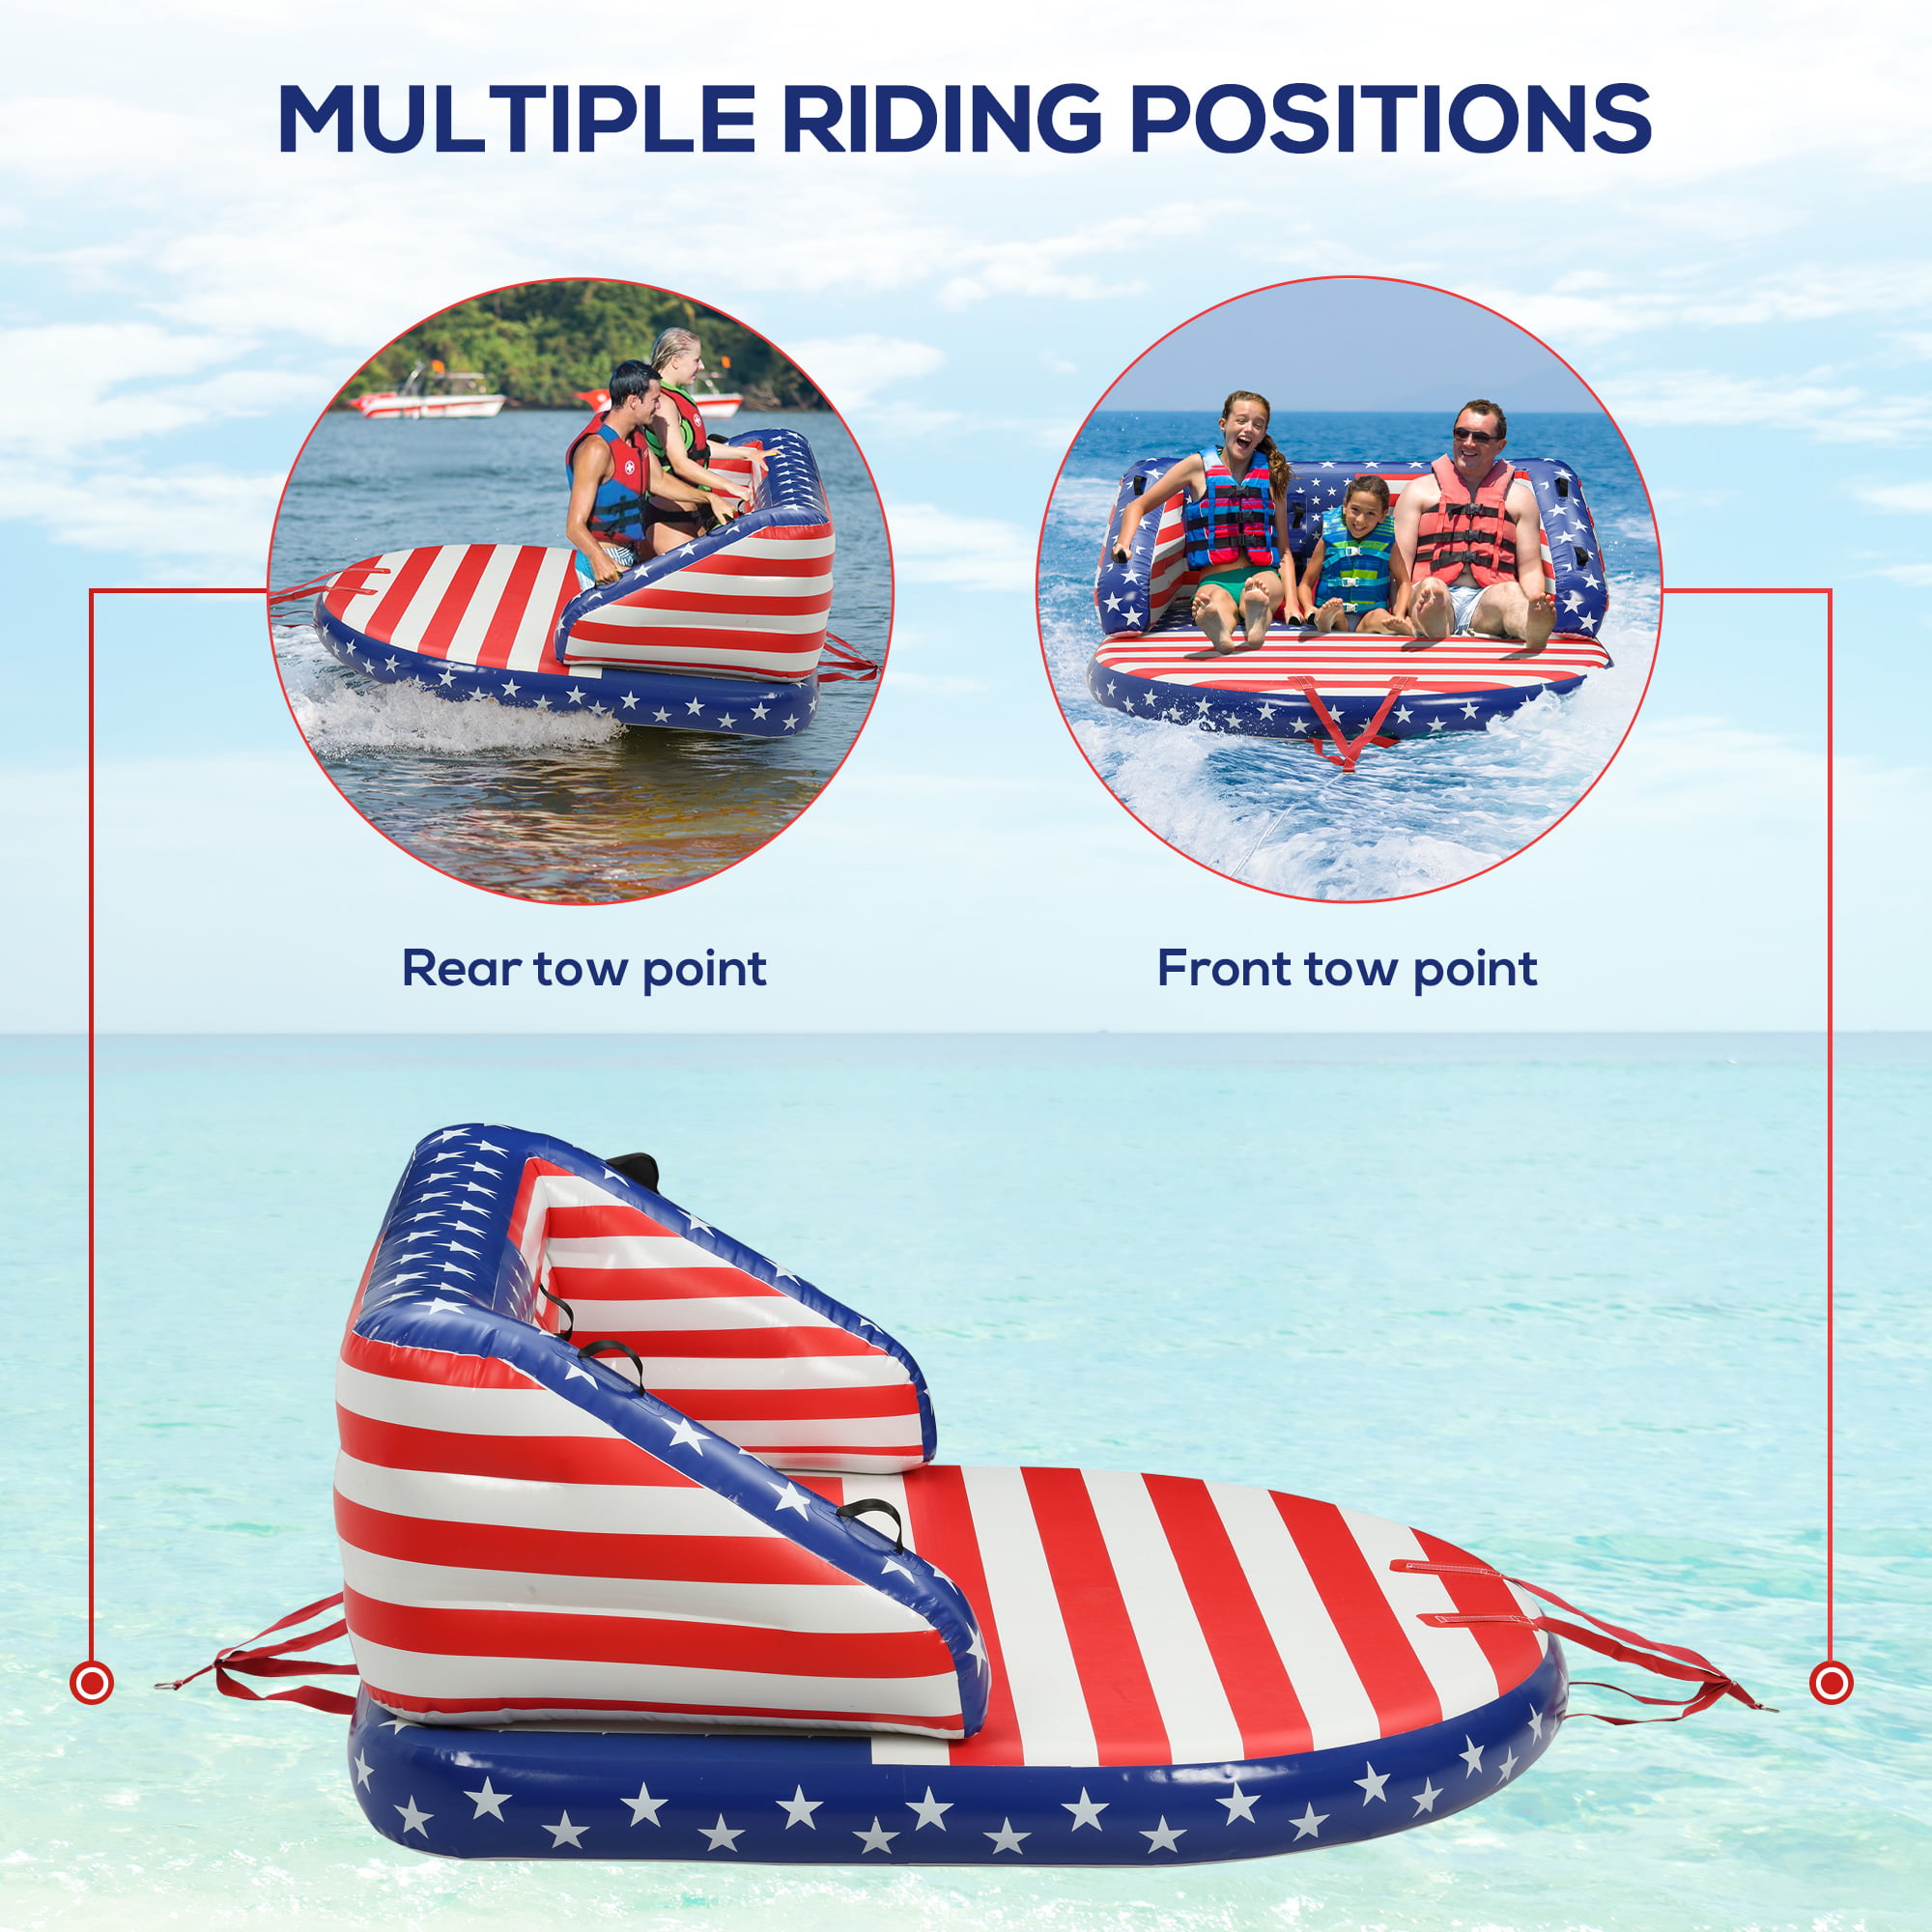 Outsunny 3 Rider Towable Tube Boating Accessories, Spacious Family Size Inflatable Deck Seat w/ Front and Back Tow Points for Multiple Riding Positions Water Sports - 1